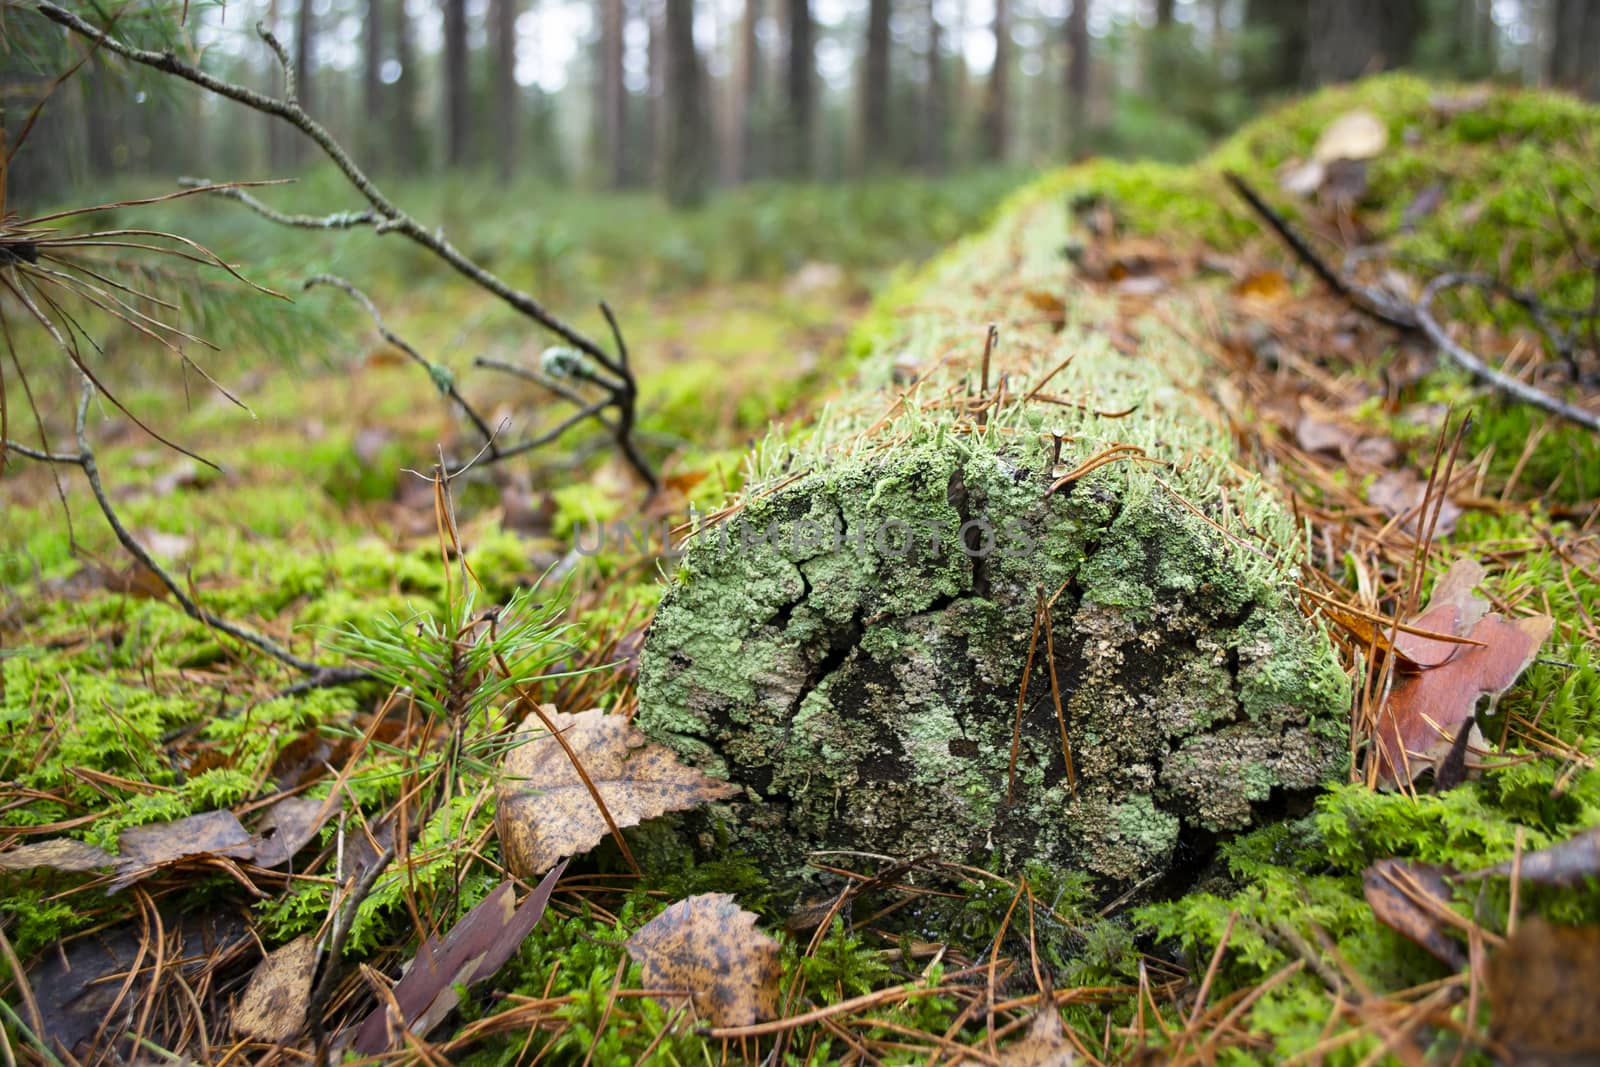 Wild forest fallen tree in the forest. The log is covered with blue green moss close up